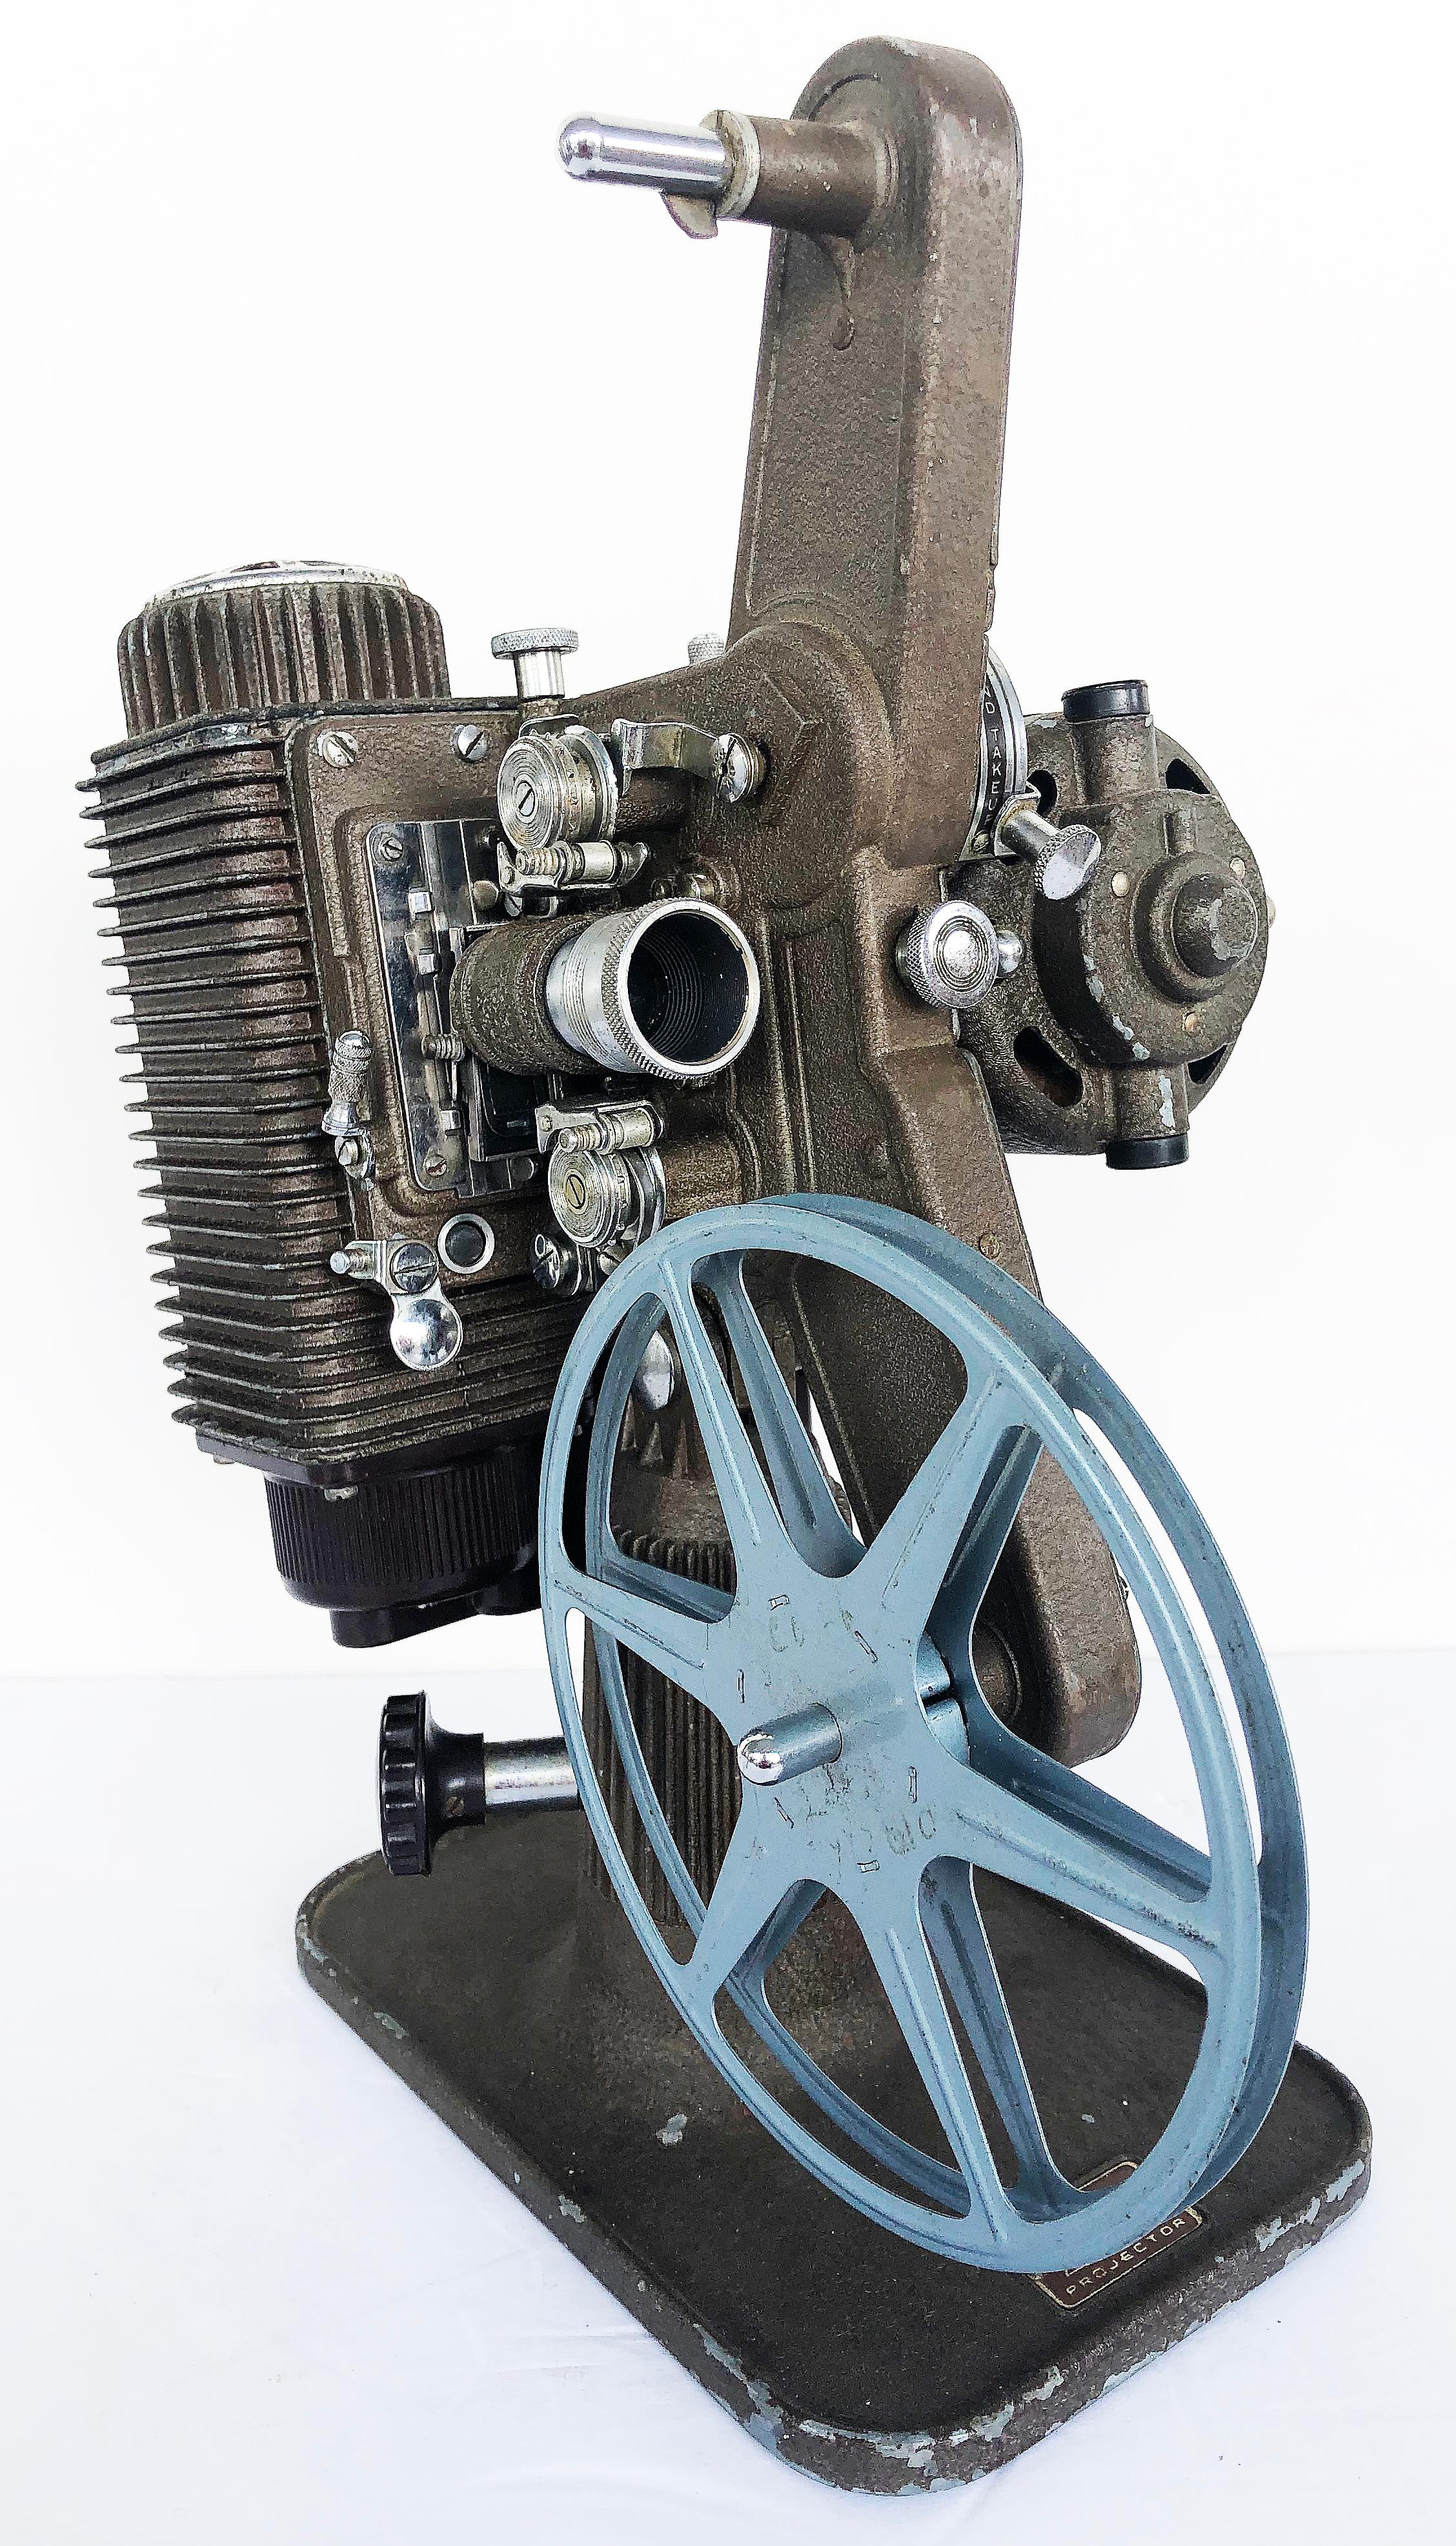 Revere Camera Co. Model 85, 8mm reel to reel projector with movies.

Offered for sale is a vintage Revere Eight Model 85 8mm reel to reel projector with 8 original movies. The projector has been tested and is in working condition. It includes what